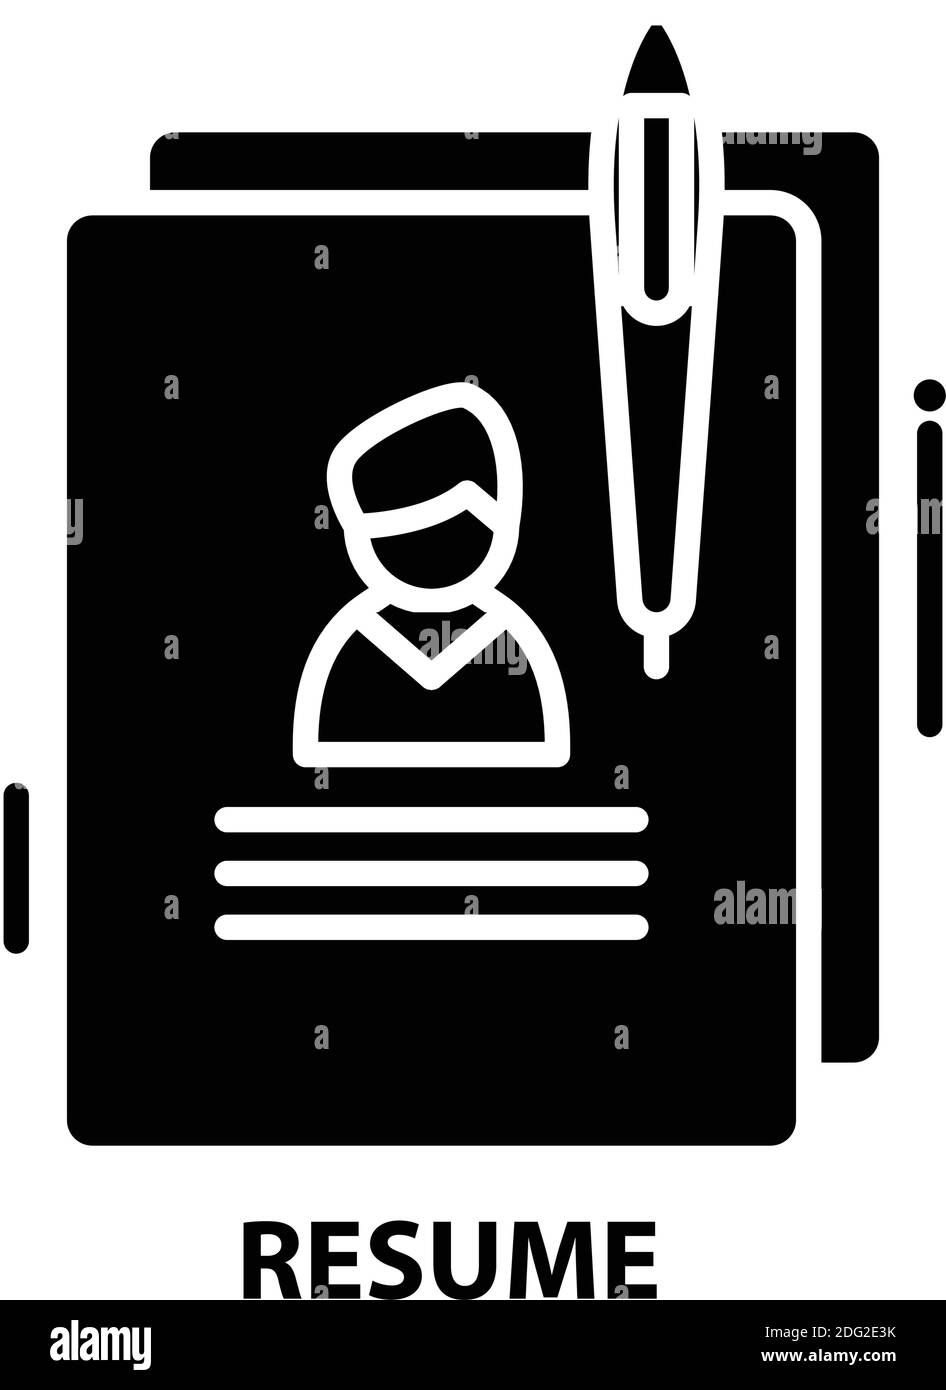 resume icon, black vector sign with editable strokes, concept illustration Stock Vector